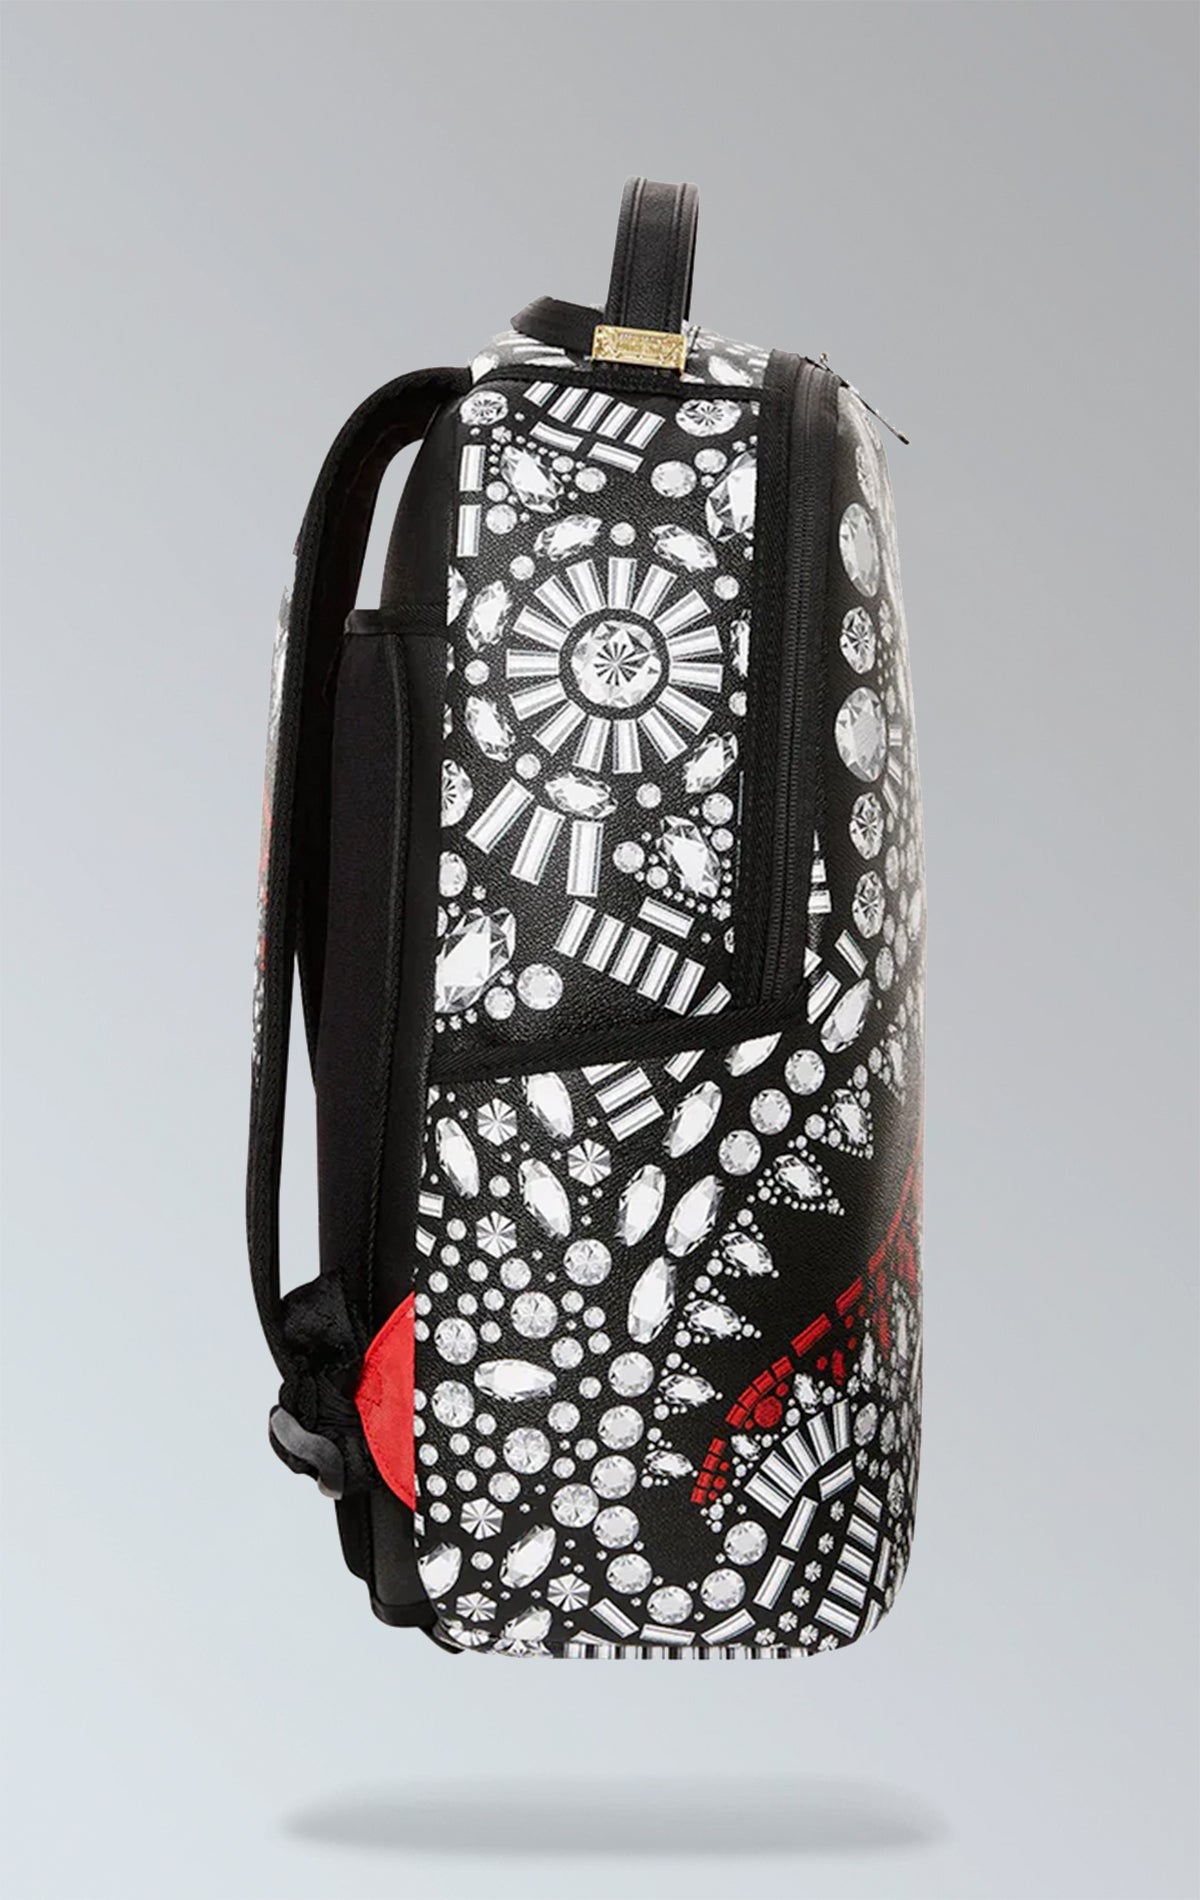 Sprayground Crazy Diamond backpack featuring an all-over print of a fierce diamond-toothed shark